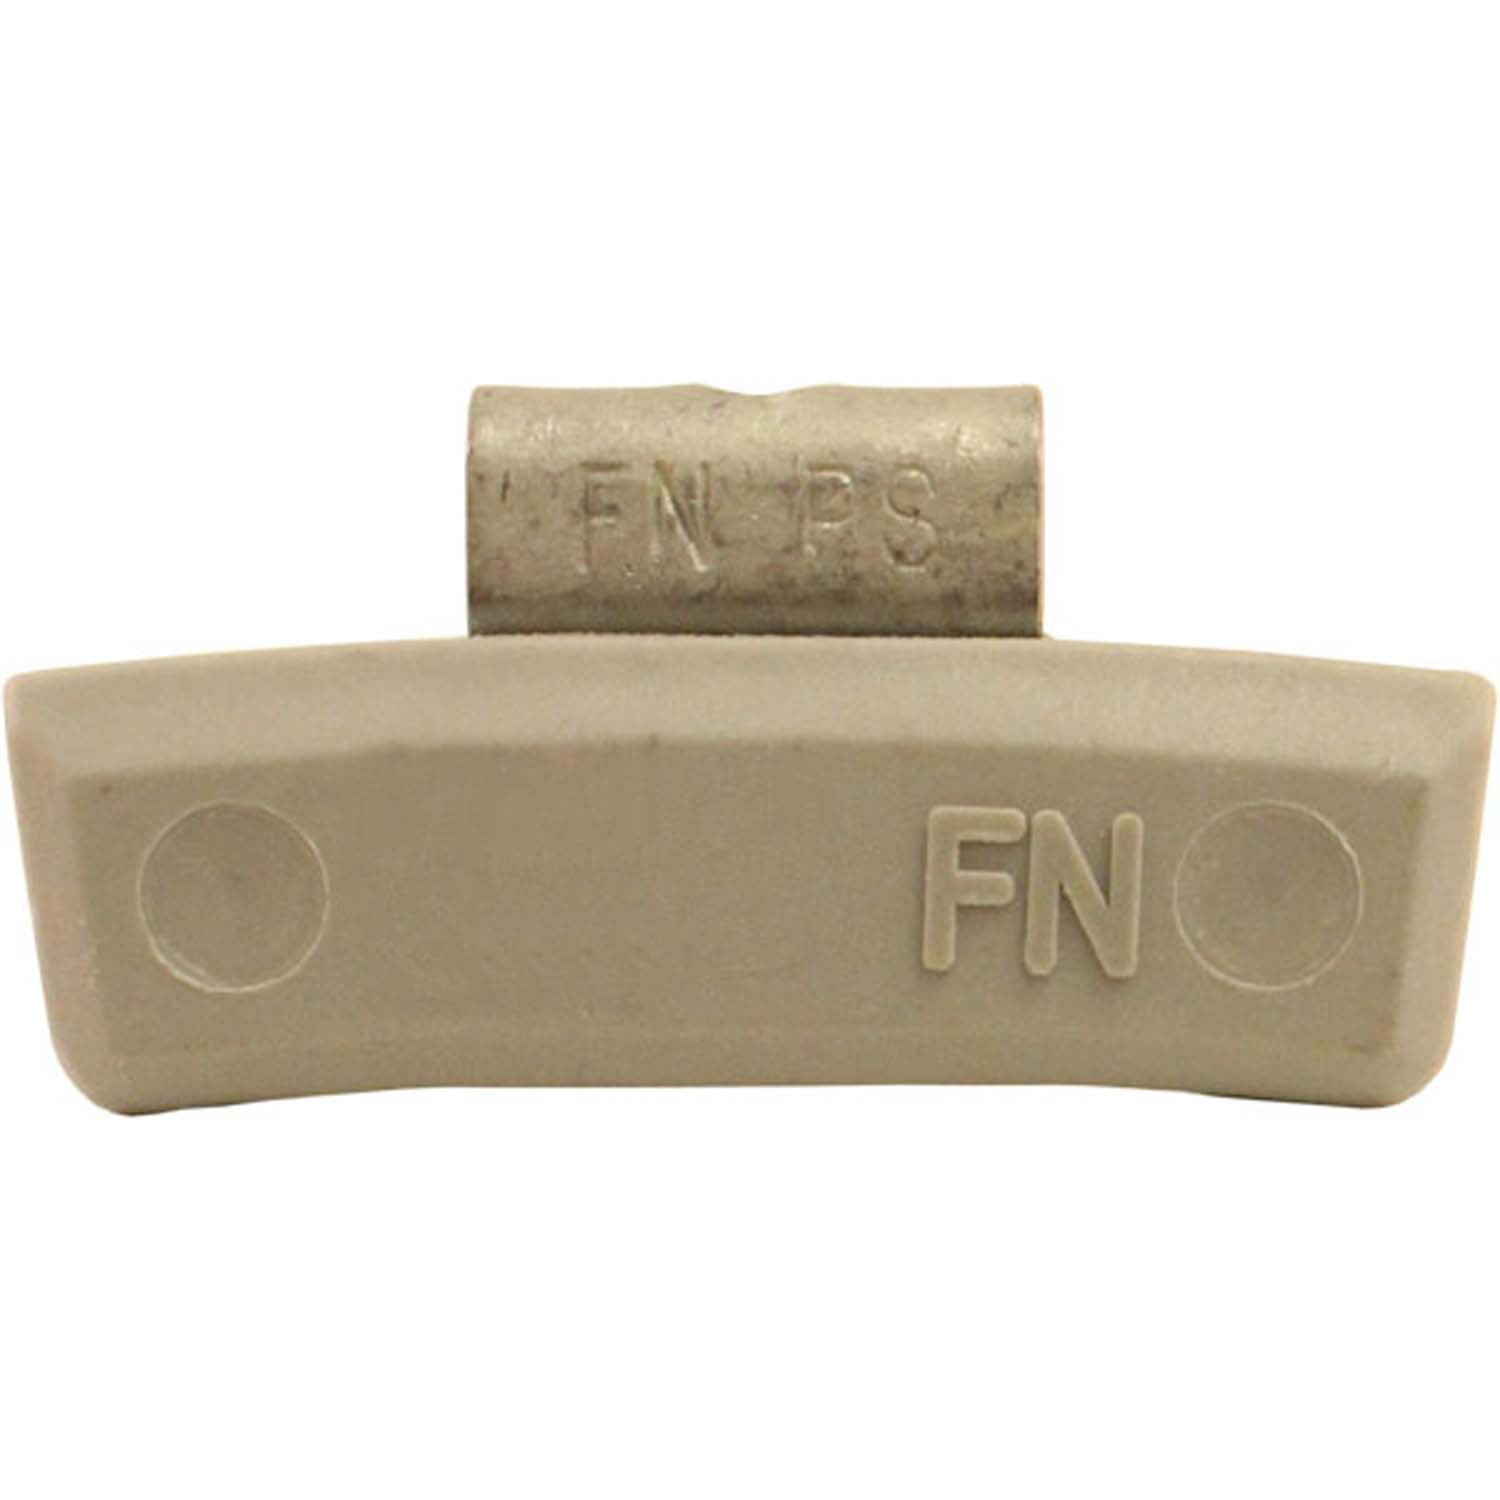 Plombco FNPS040 Plasteel Clip-On Wheel Weight 40gm - Box of 25